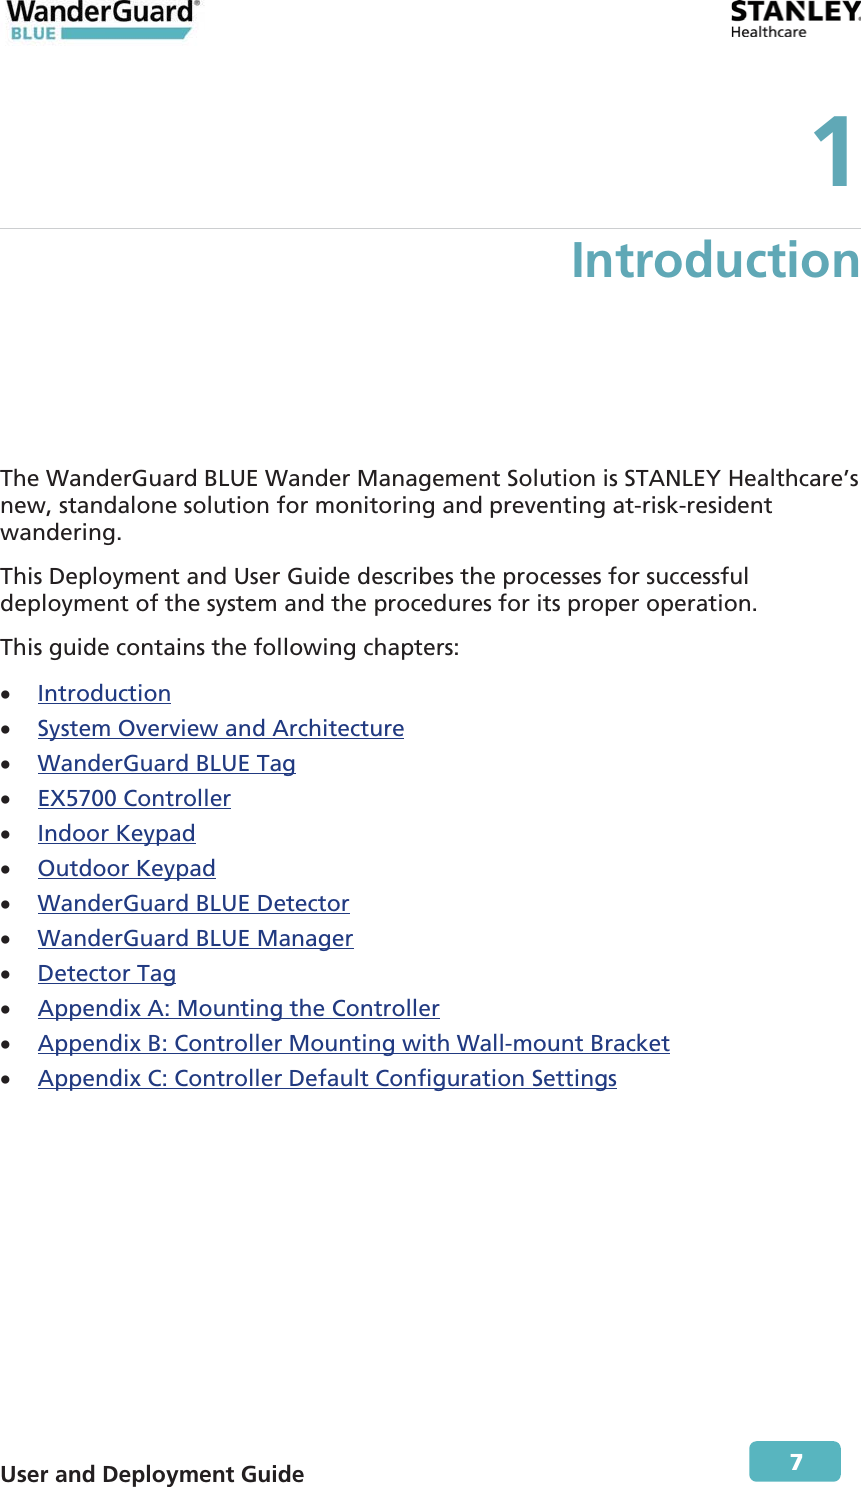  User and Deployment Guide        7 1 Introduction The WanderGuard BLUE Wander Management Solution is STANLEY Healthcare’s new, standalone solution for monitoring and preventing at-risk-resident wandering.  This Deployment and User Guide describes the processes for successful deployment of the system and the procedures for its proper operation. This guide contains the following chapters: x Introduction xSystem Overview and Architecturex WanderGuard BLUE Tag x EX5700 Controller x Indoor Keypad x Outdoor Keypad xWanderGuard BLUE Detectorx WanderGuard BLUE Manager x Detector Tagx Appendix A: Mounting the Controller x Appendix B: Controller Mounting with Wall-mount Bracket x Appendix C: Controller Default Configuration Settings 